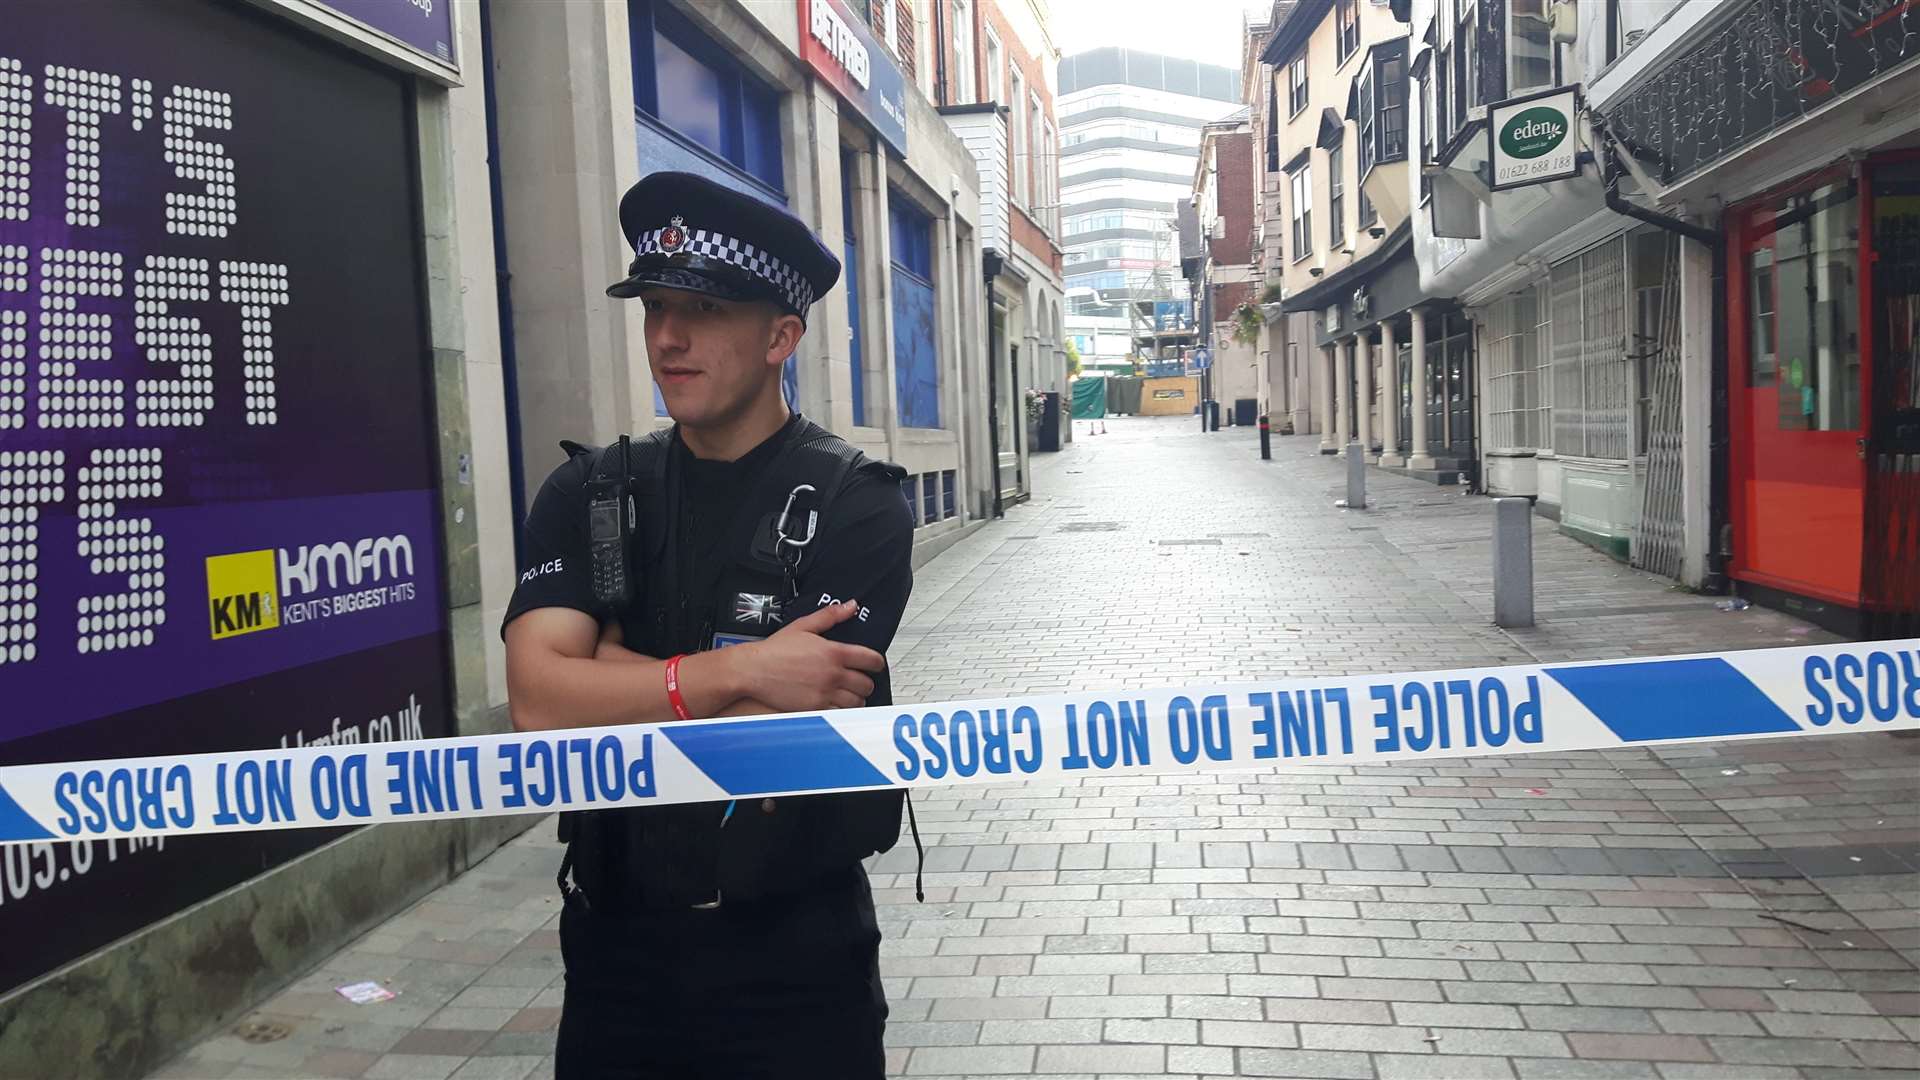 Police at the scene in Maidstone town centre